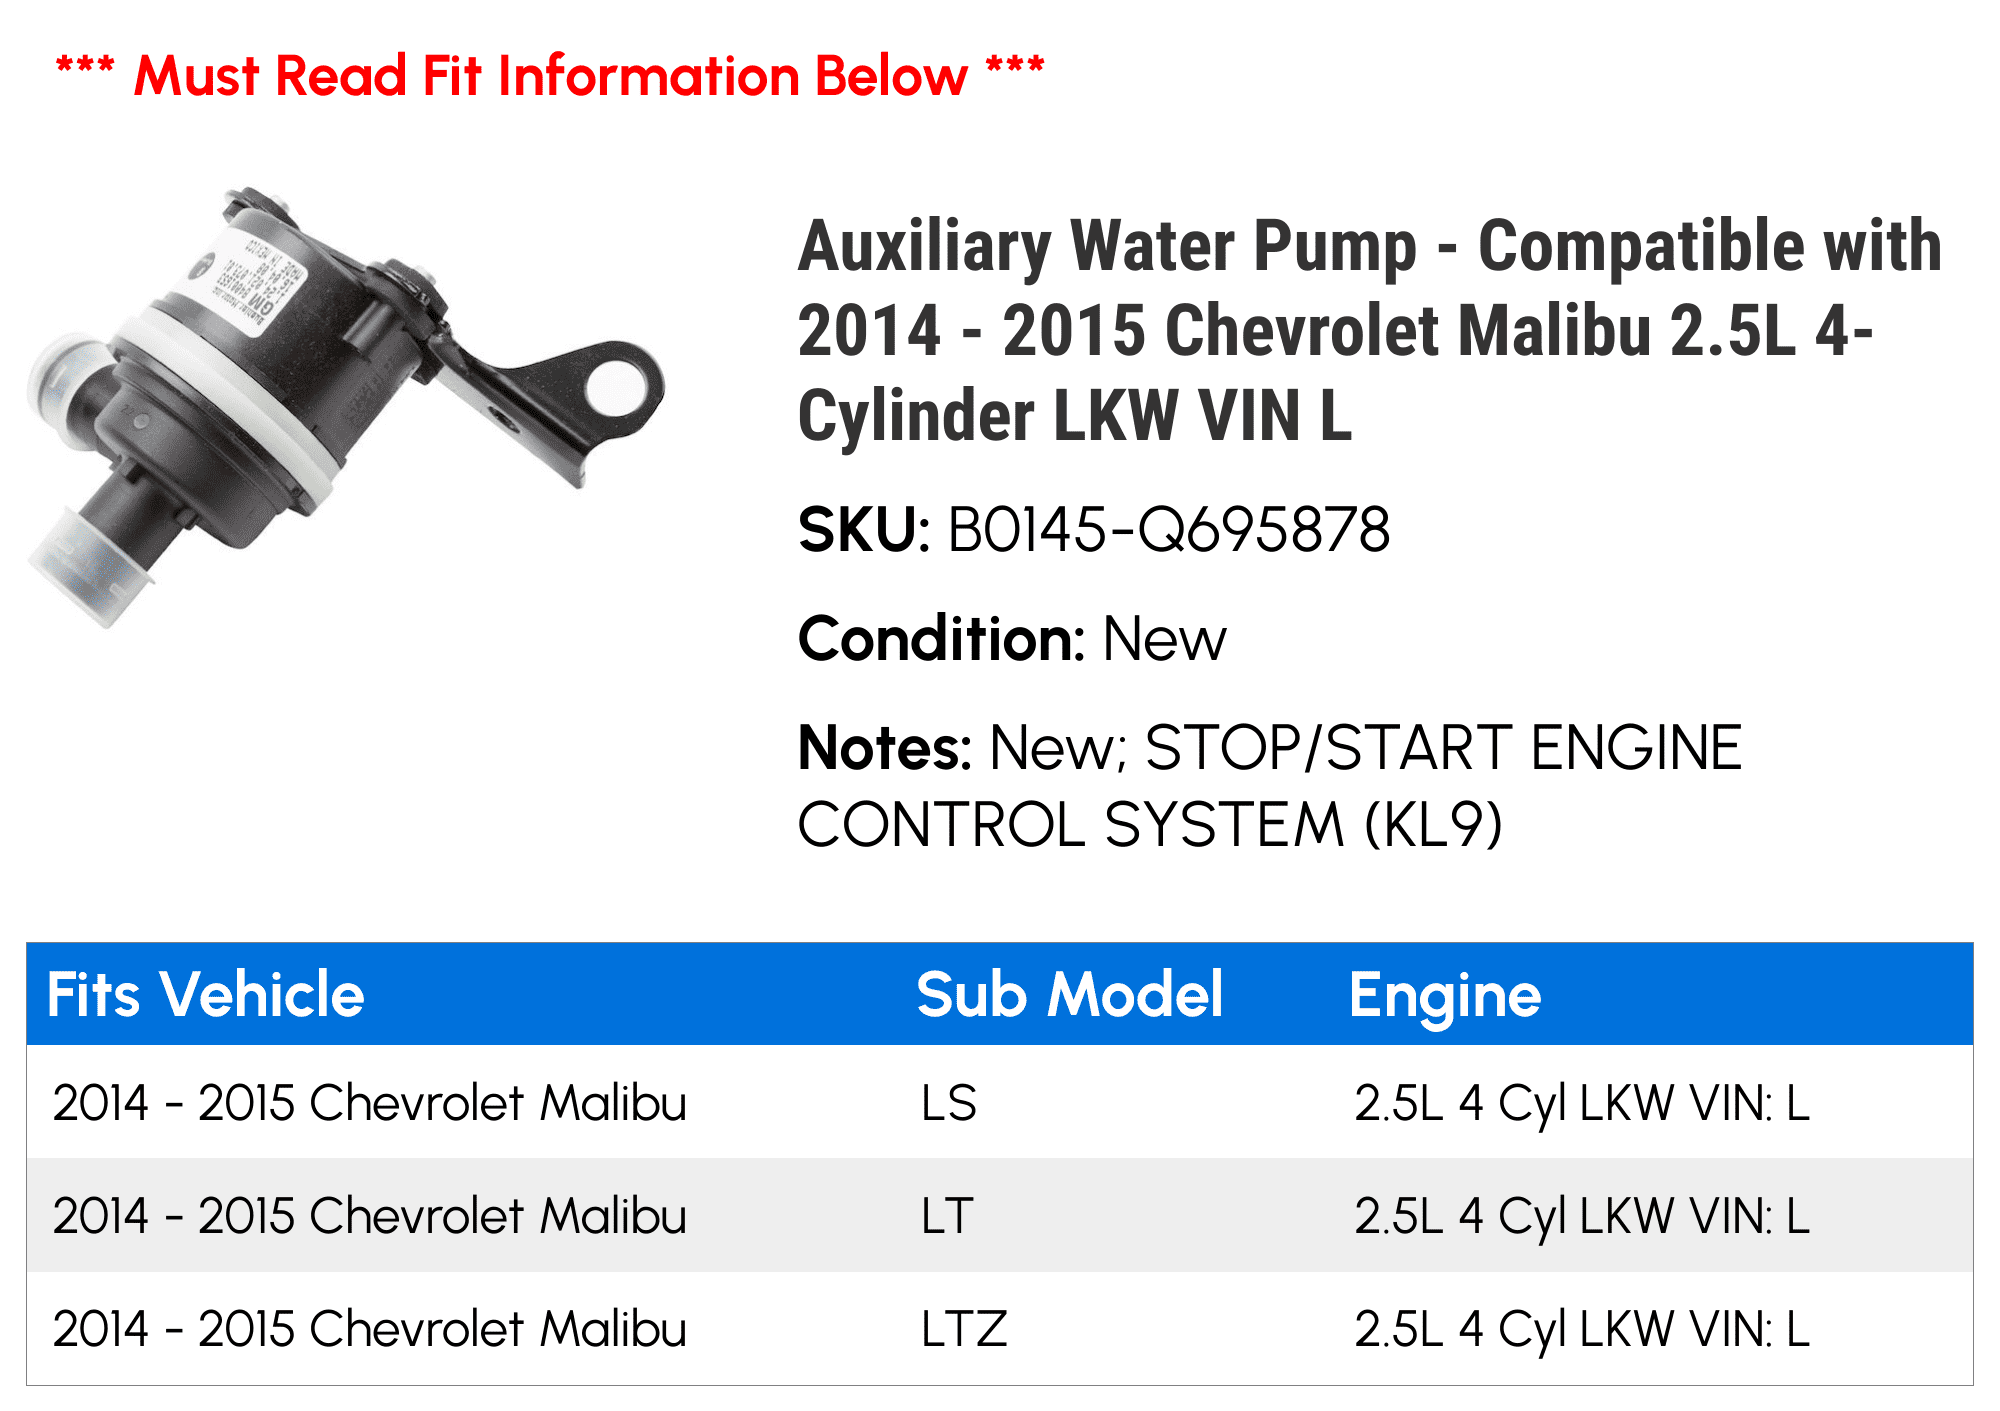 Auxiliary Water Pump - Compatible with 2014 - 2015 Chevy Malibu 2.5L  4-Cylinder LKW VIN L